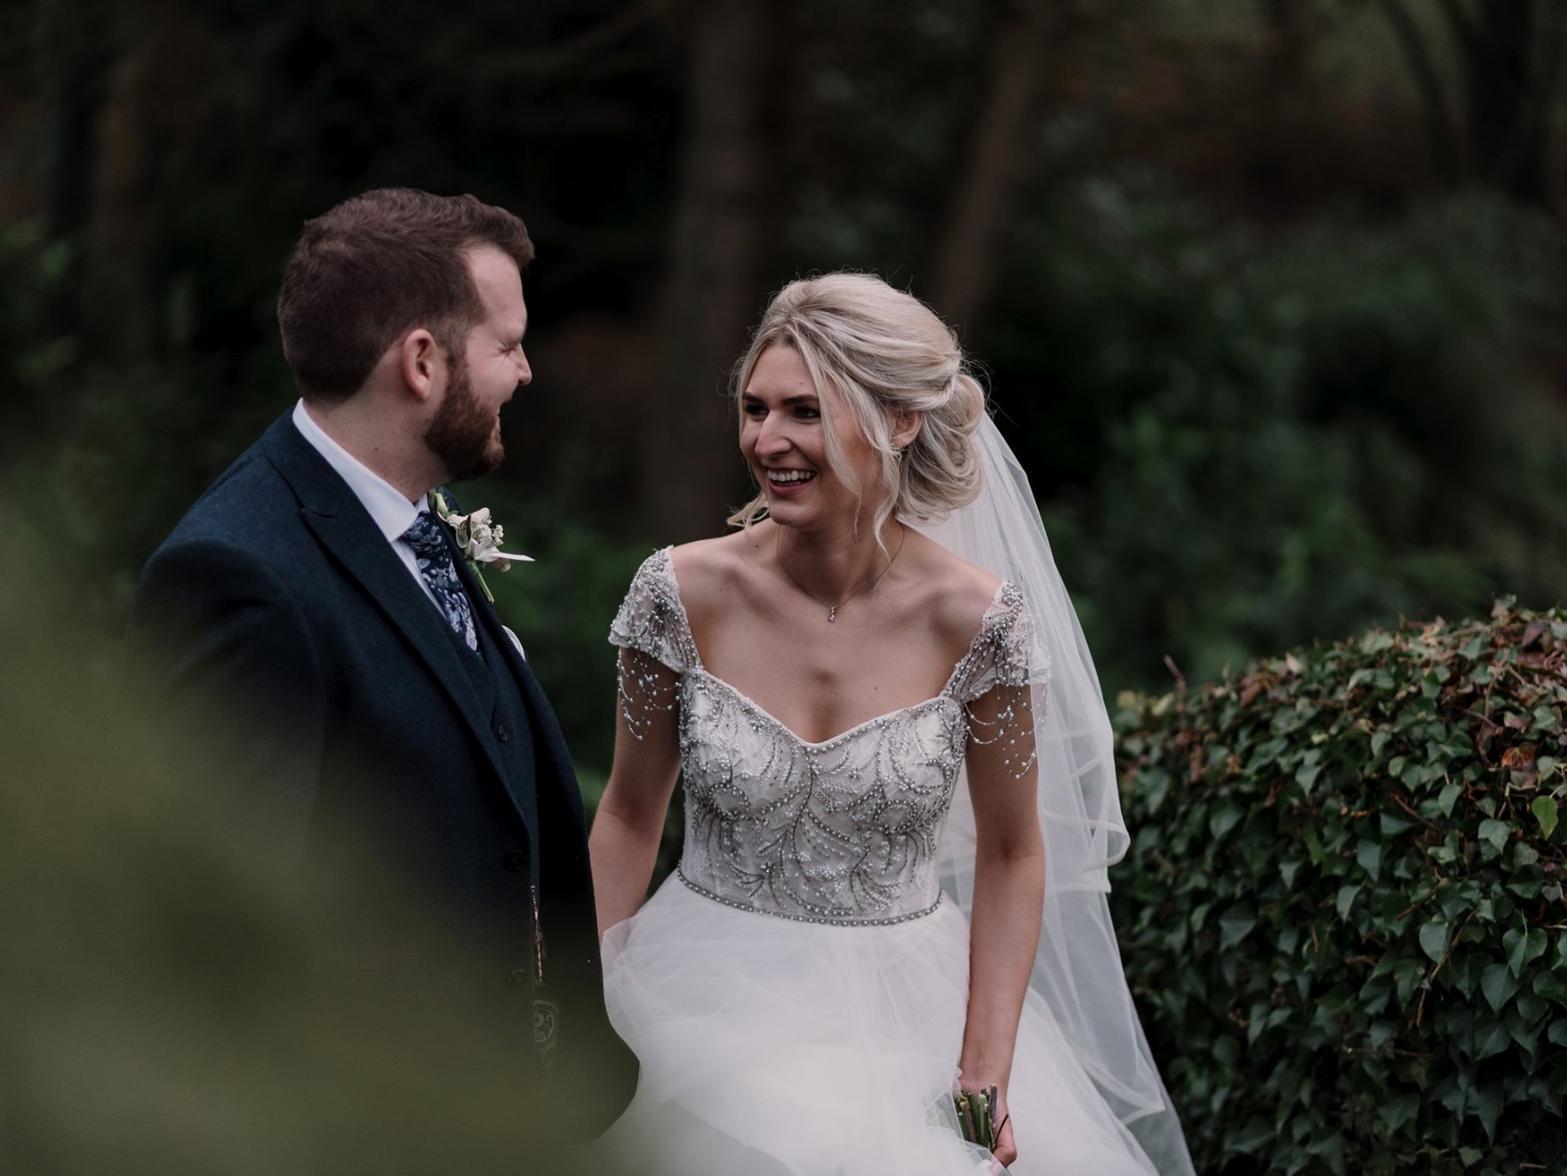 Tom, 33, added: When people said your wedding day goes by in a blur, you never believe them. To marry the love of your life surrounded by friends and family was truly special.